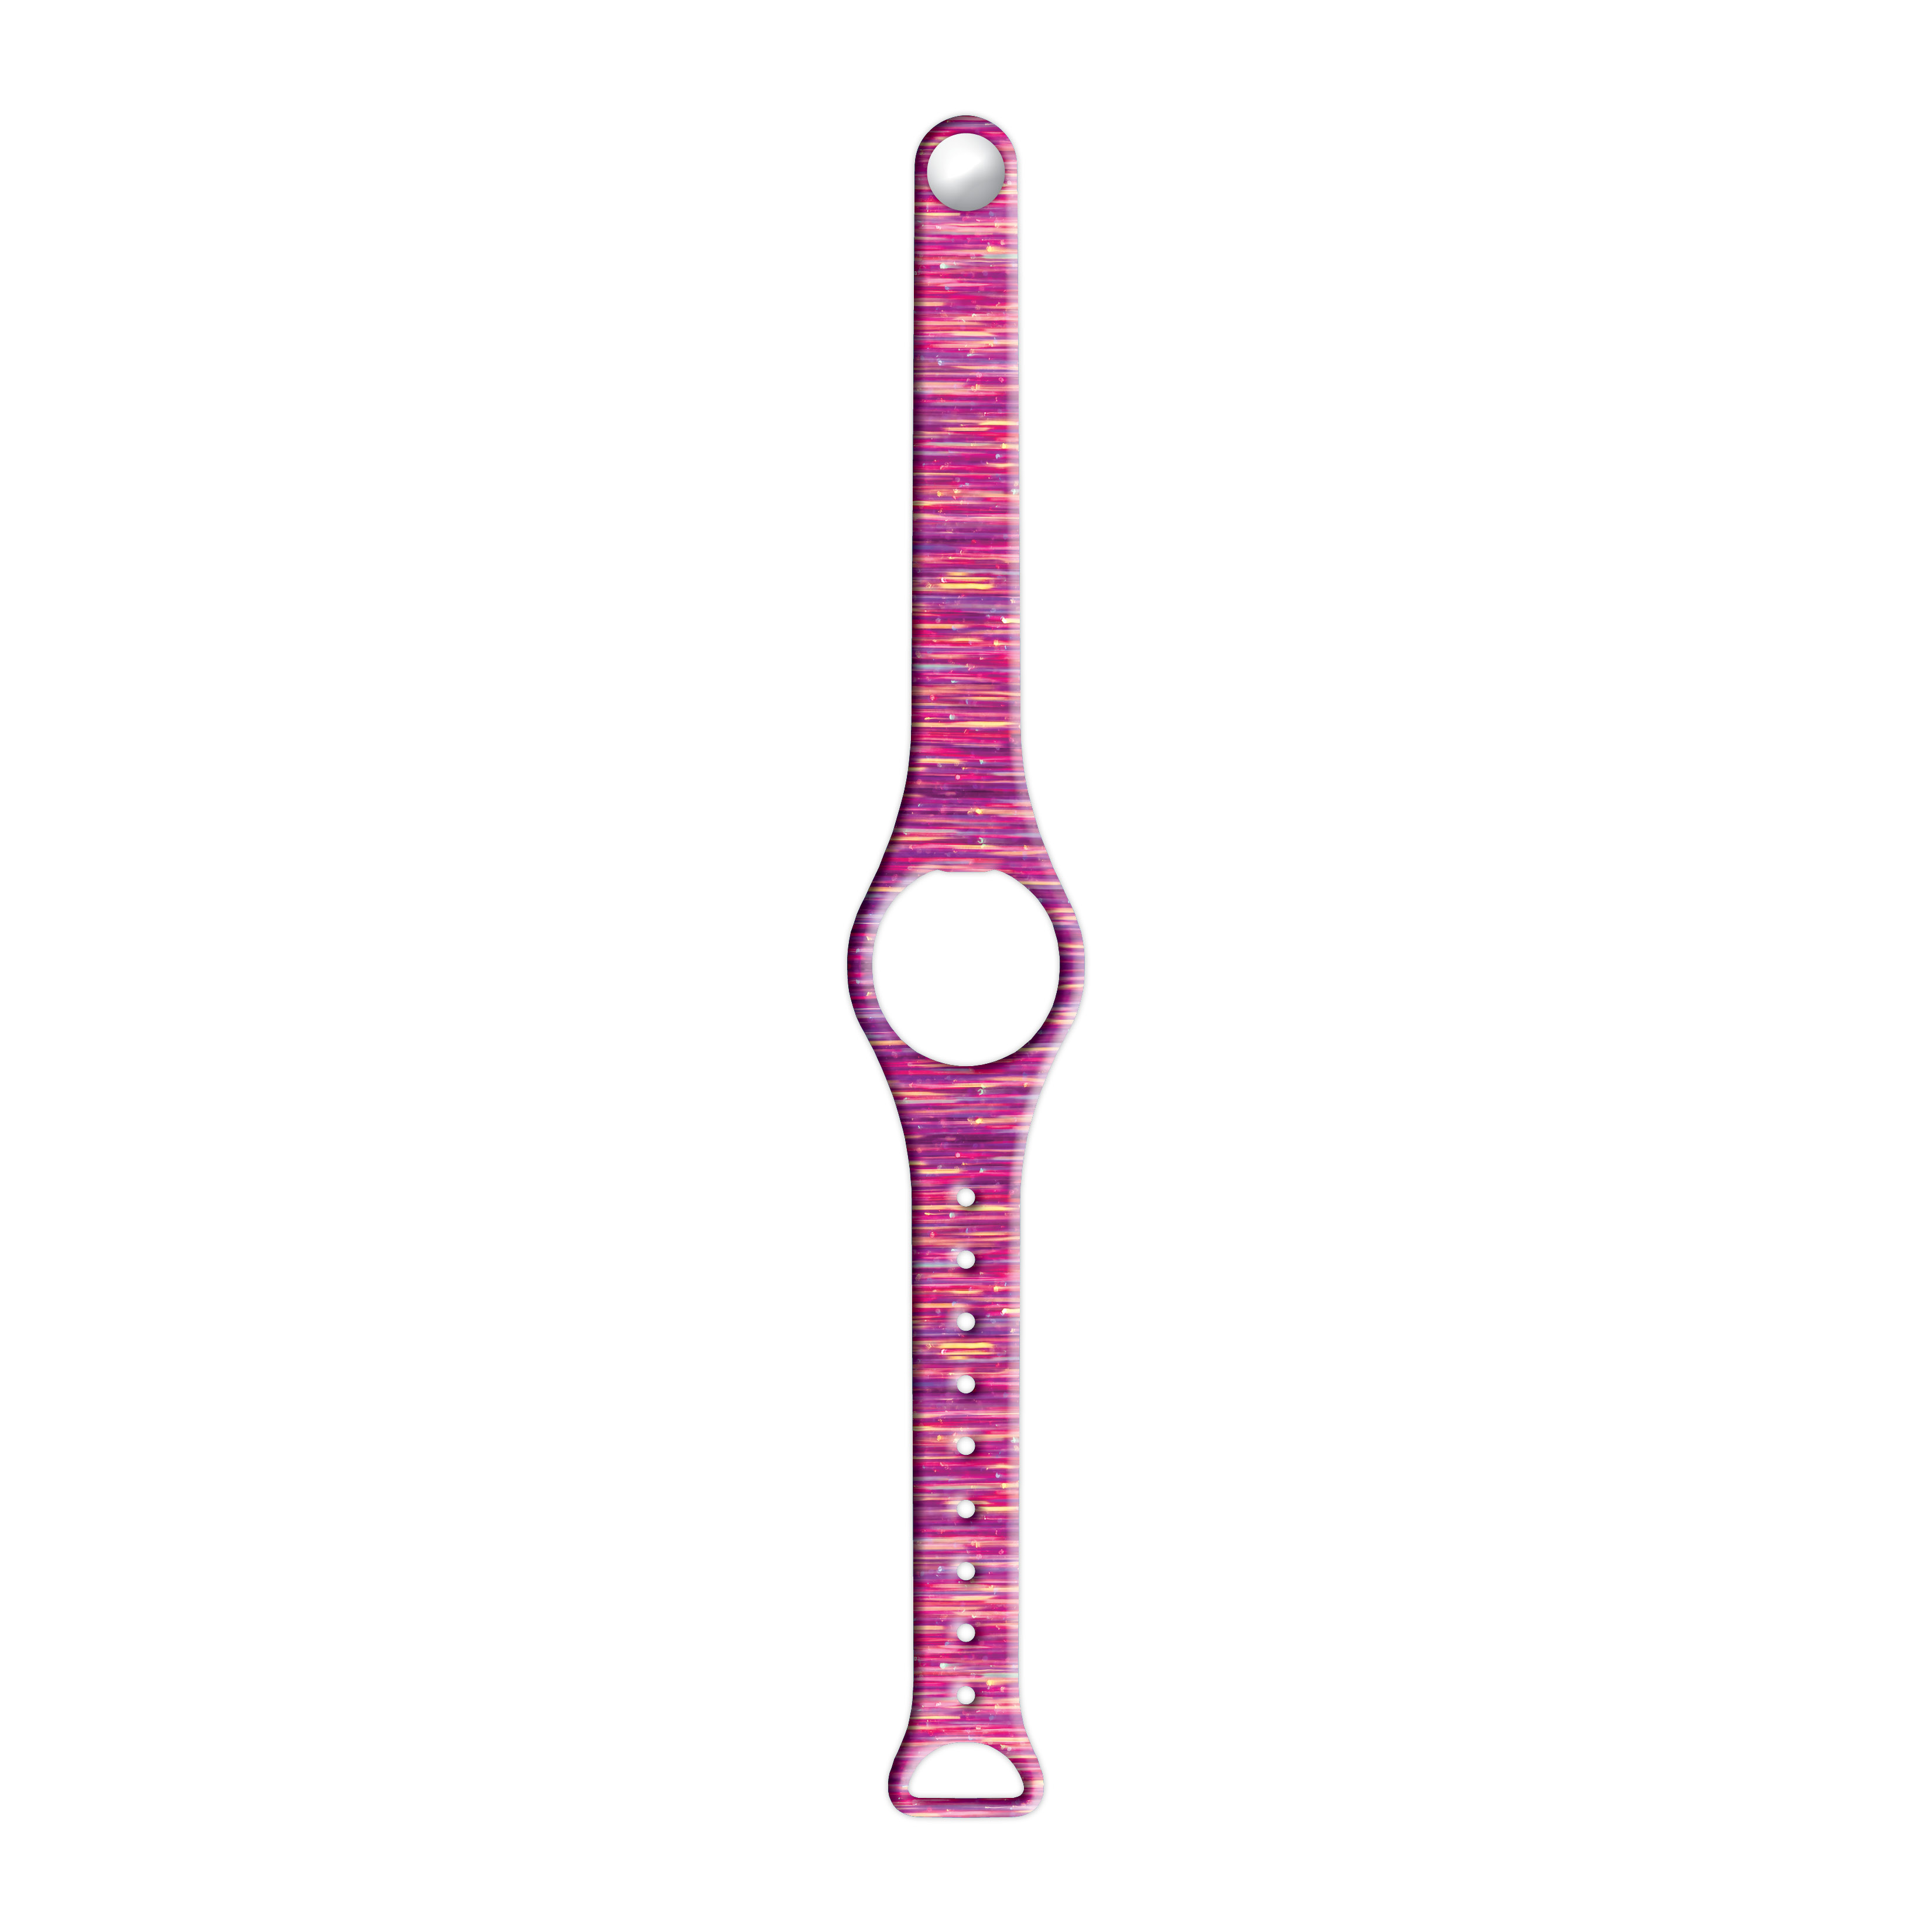 Stretch - Watchitude Move 2 | Blip Watch Band (Band Only) image number 0